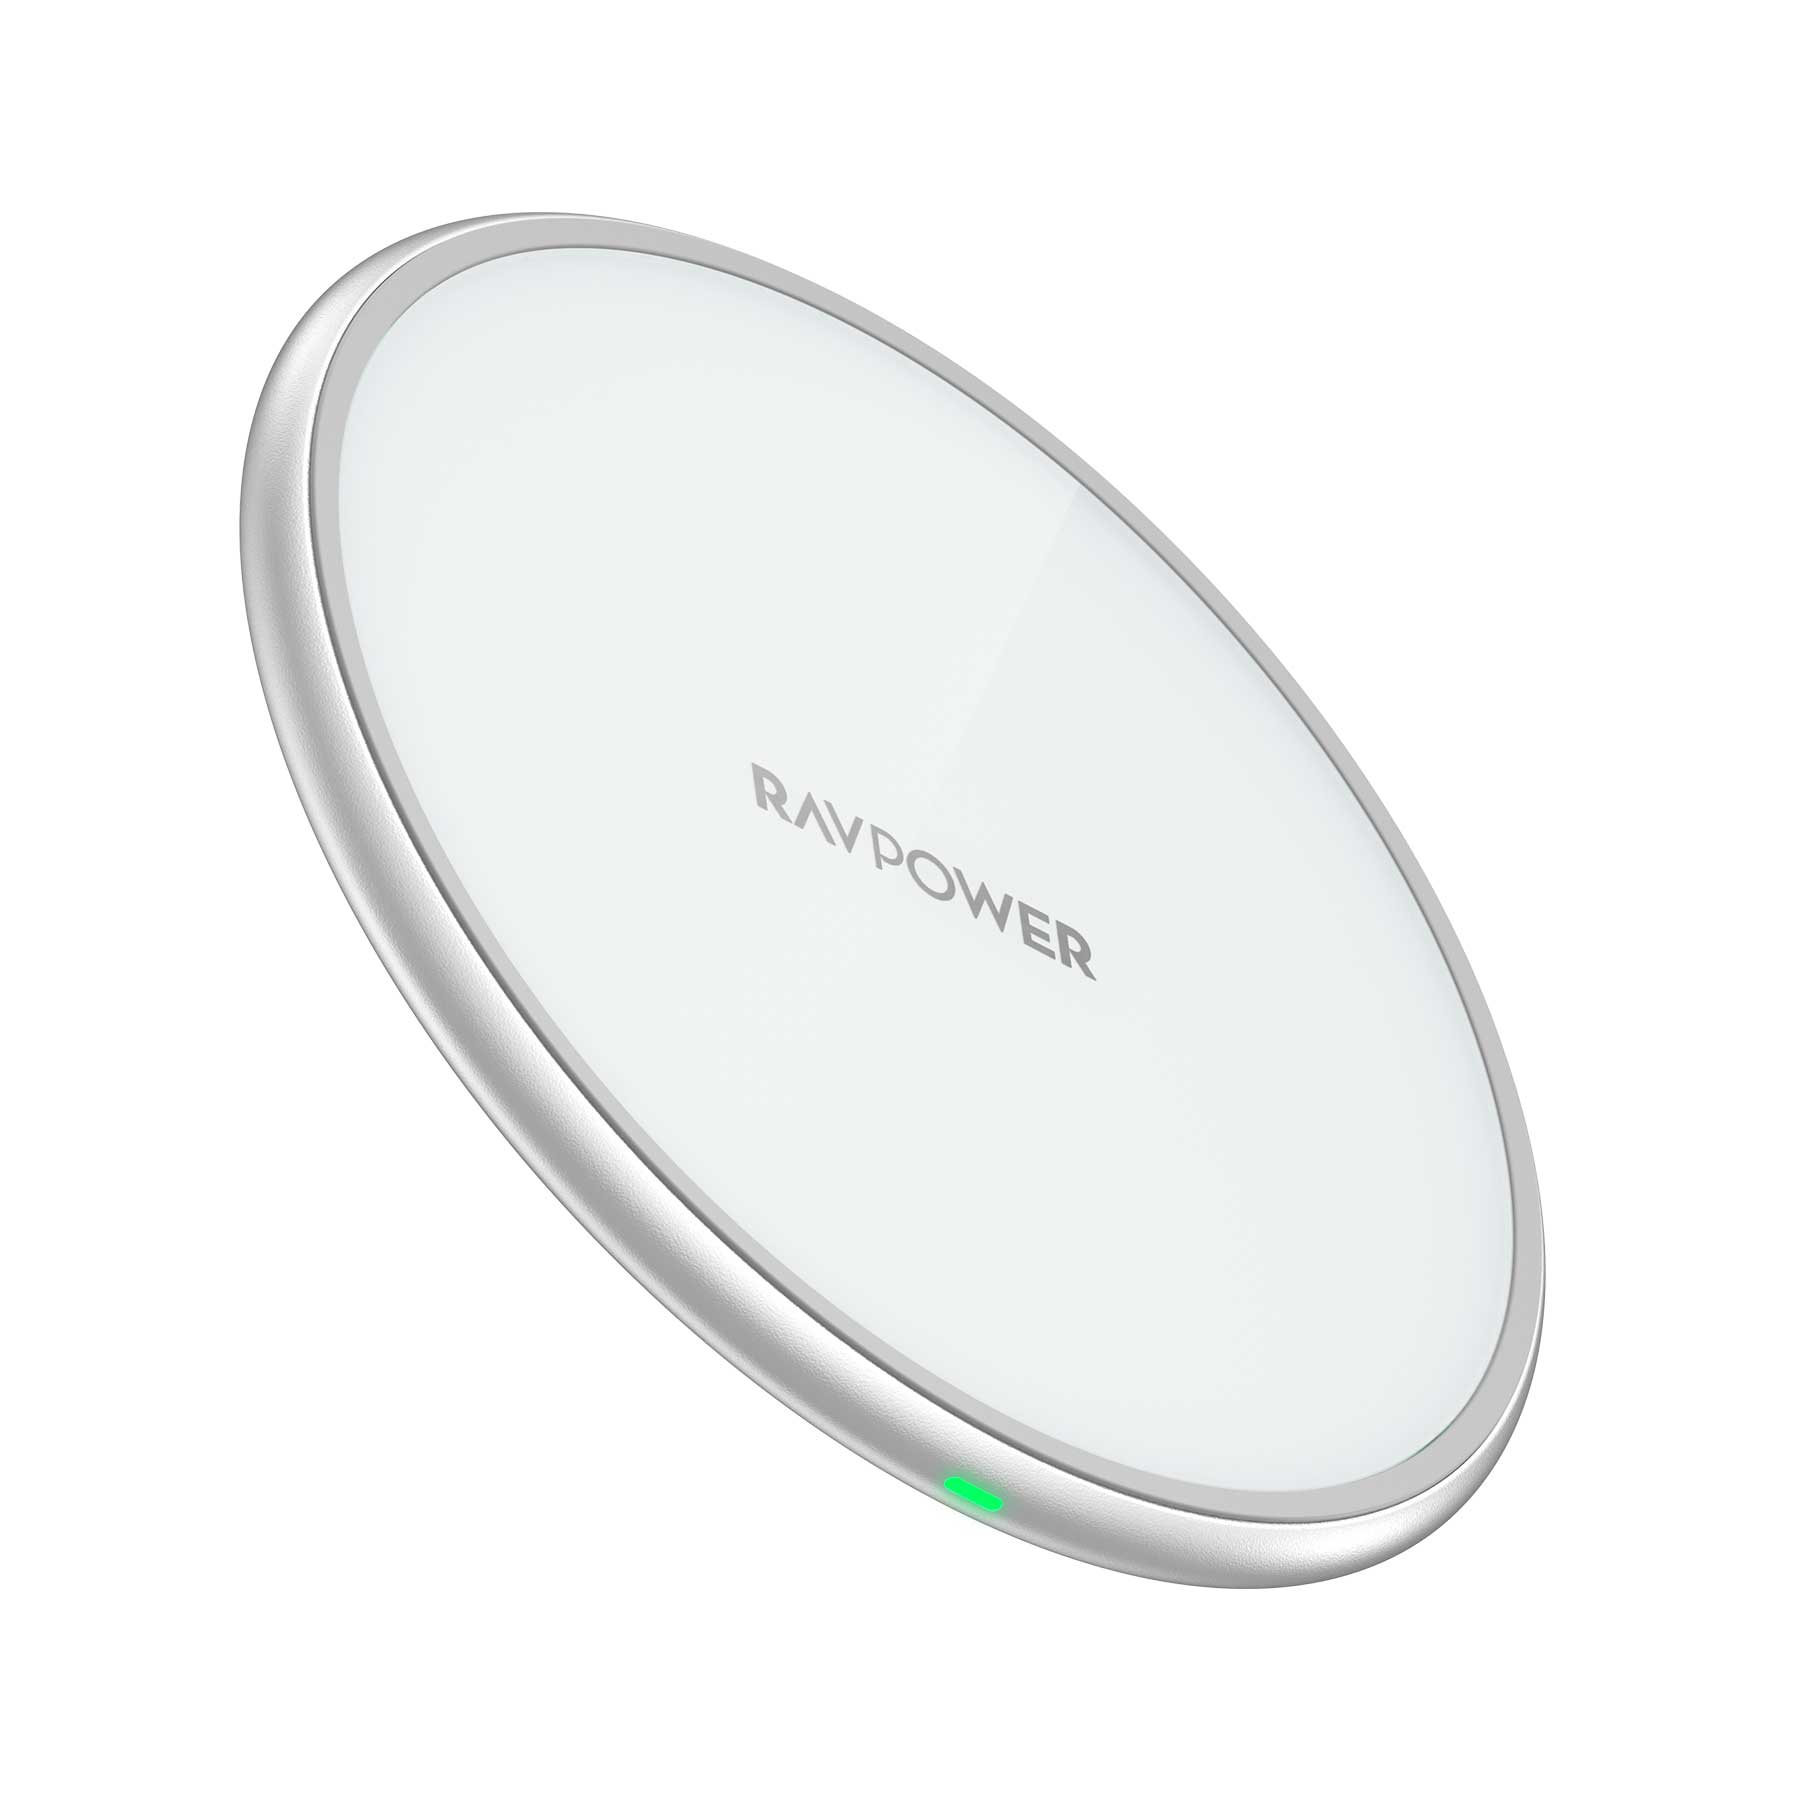 RS0P001W / RP-OWCF001 | RAVPower Japan RAVPower 10W WIRELESS CHARGER